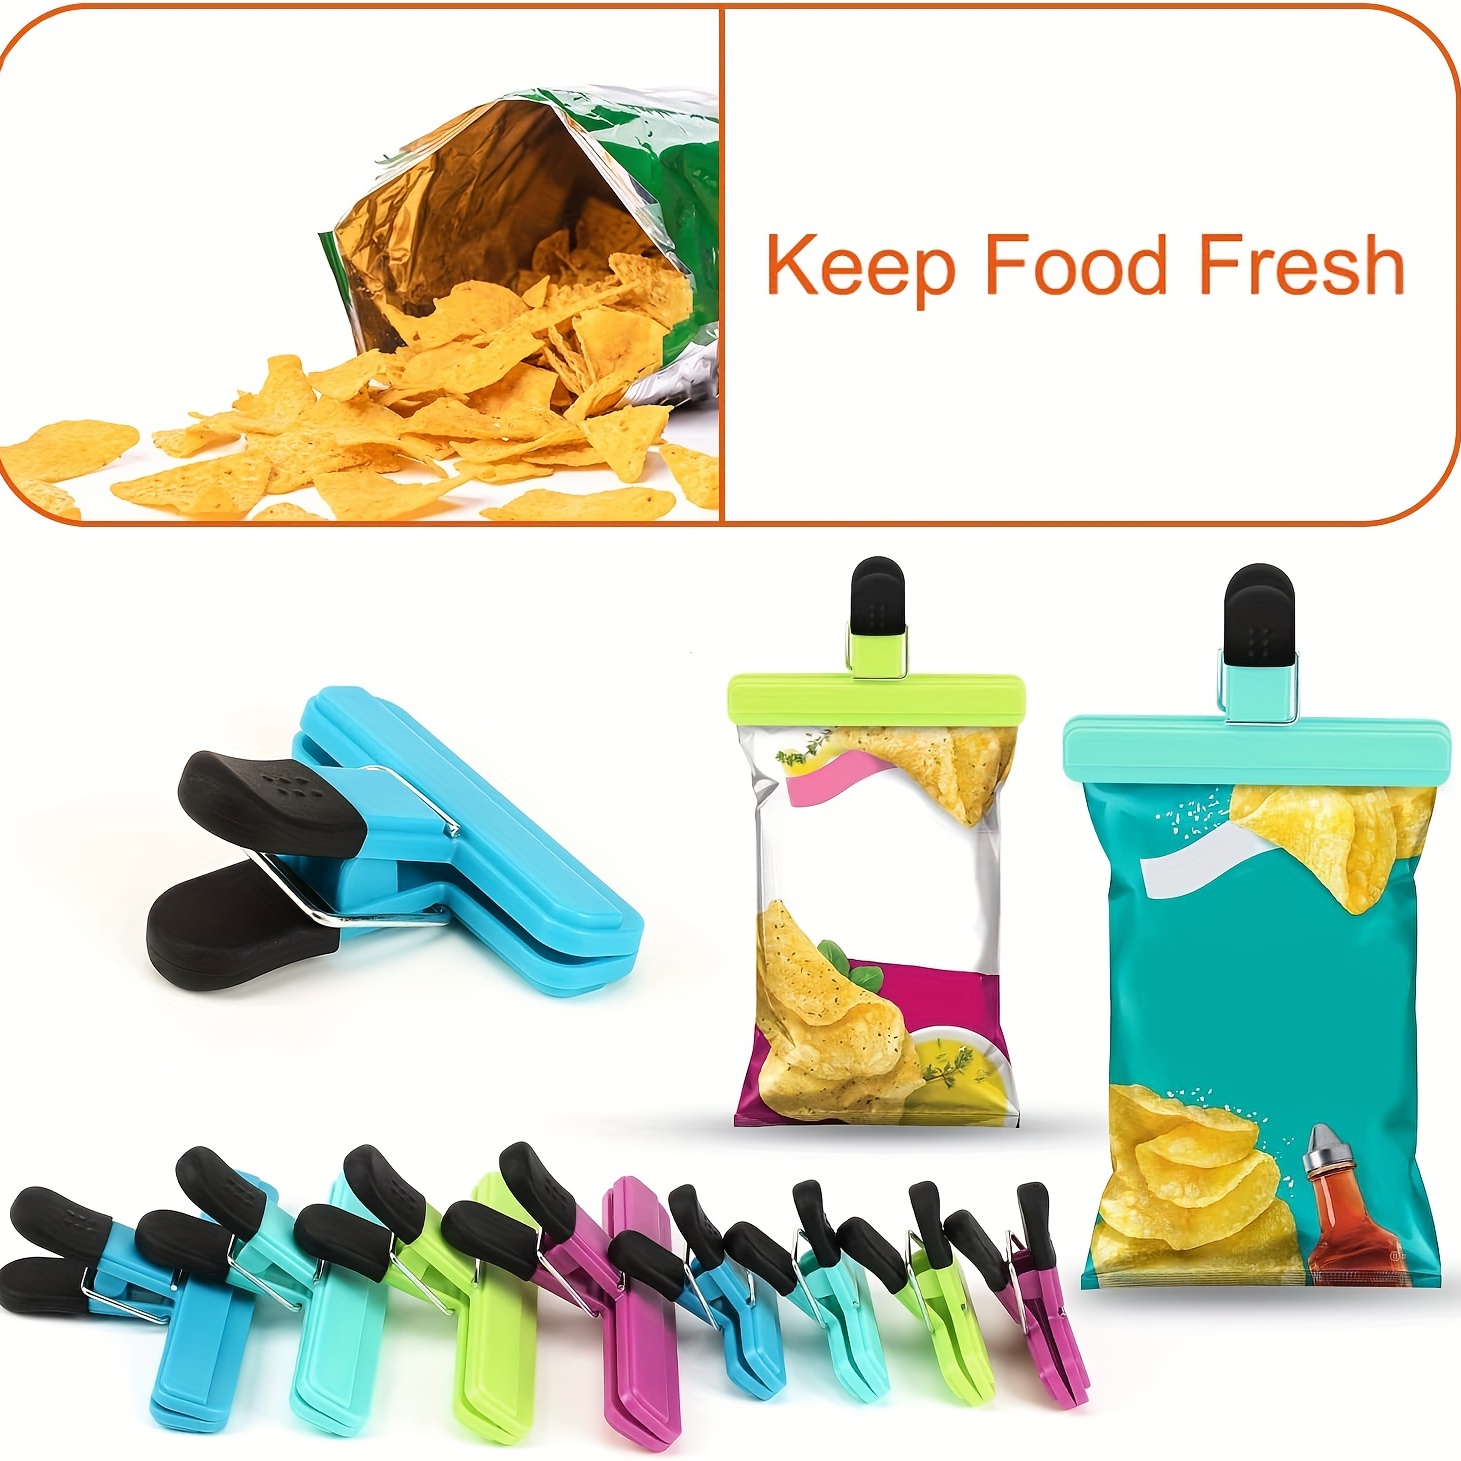 Bag Sealing Clips For Food Package, Resealable Chip Clips Food Bag